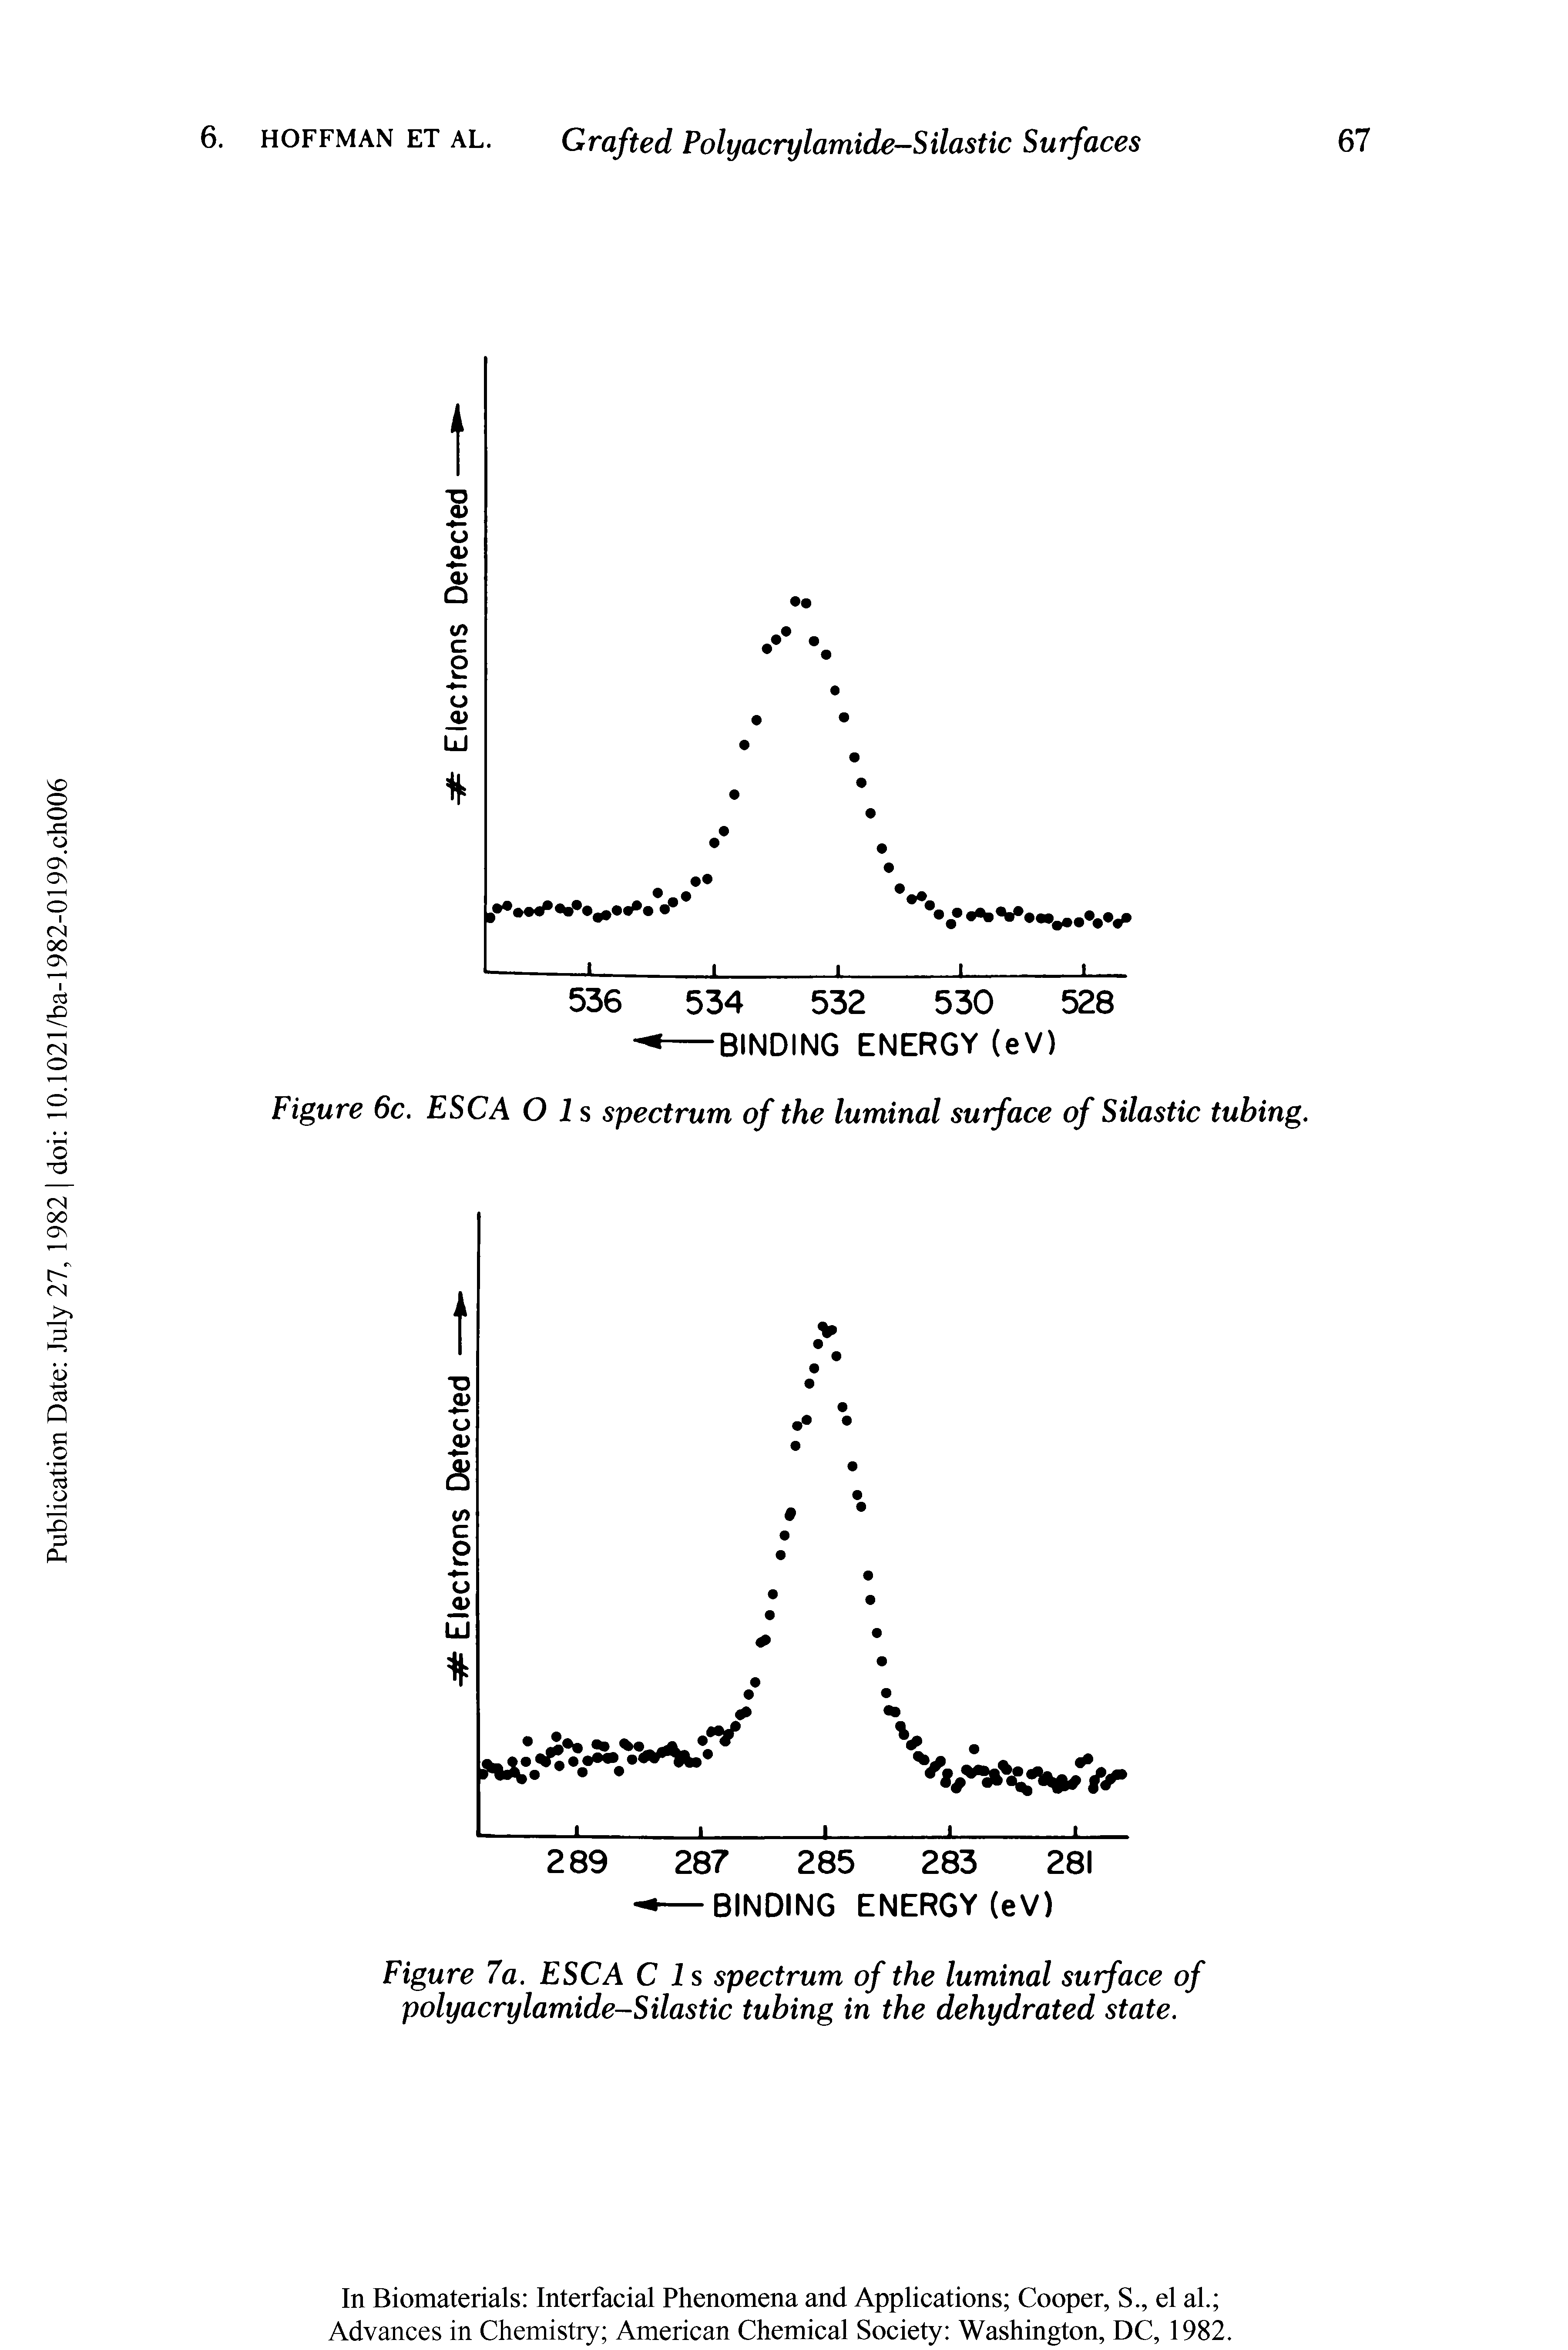 Figure 7a. ESC A C Is spectrum of the luminal surface of polyacrylamide-Silastic tubing in the dehydrated state.